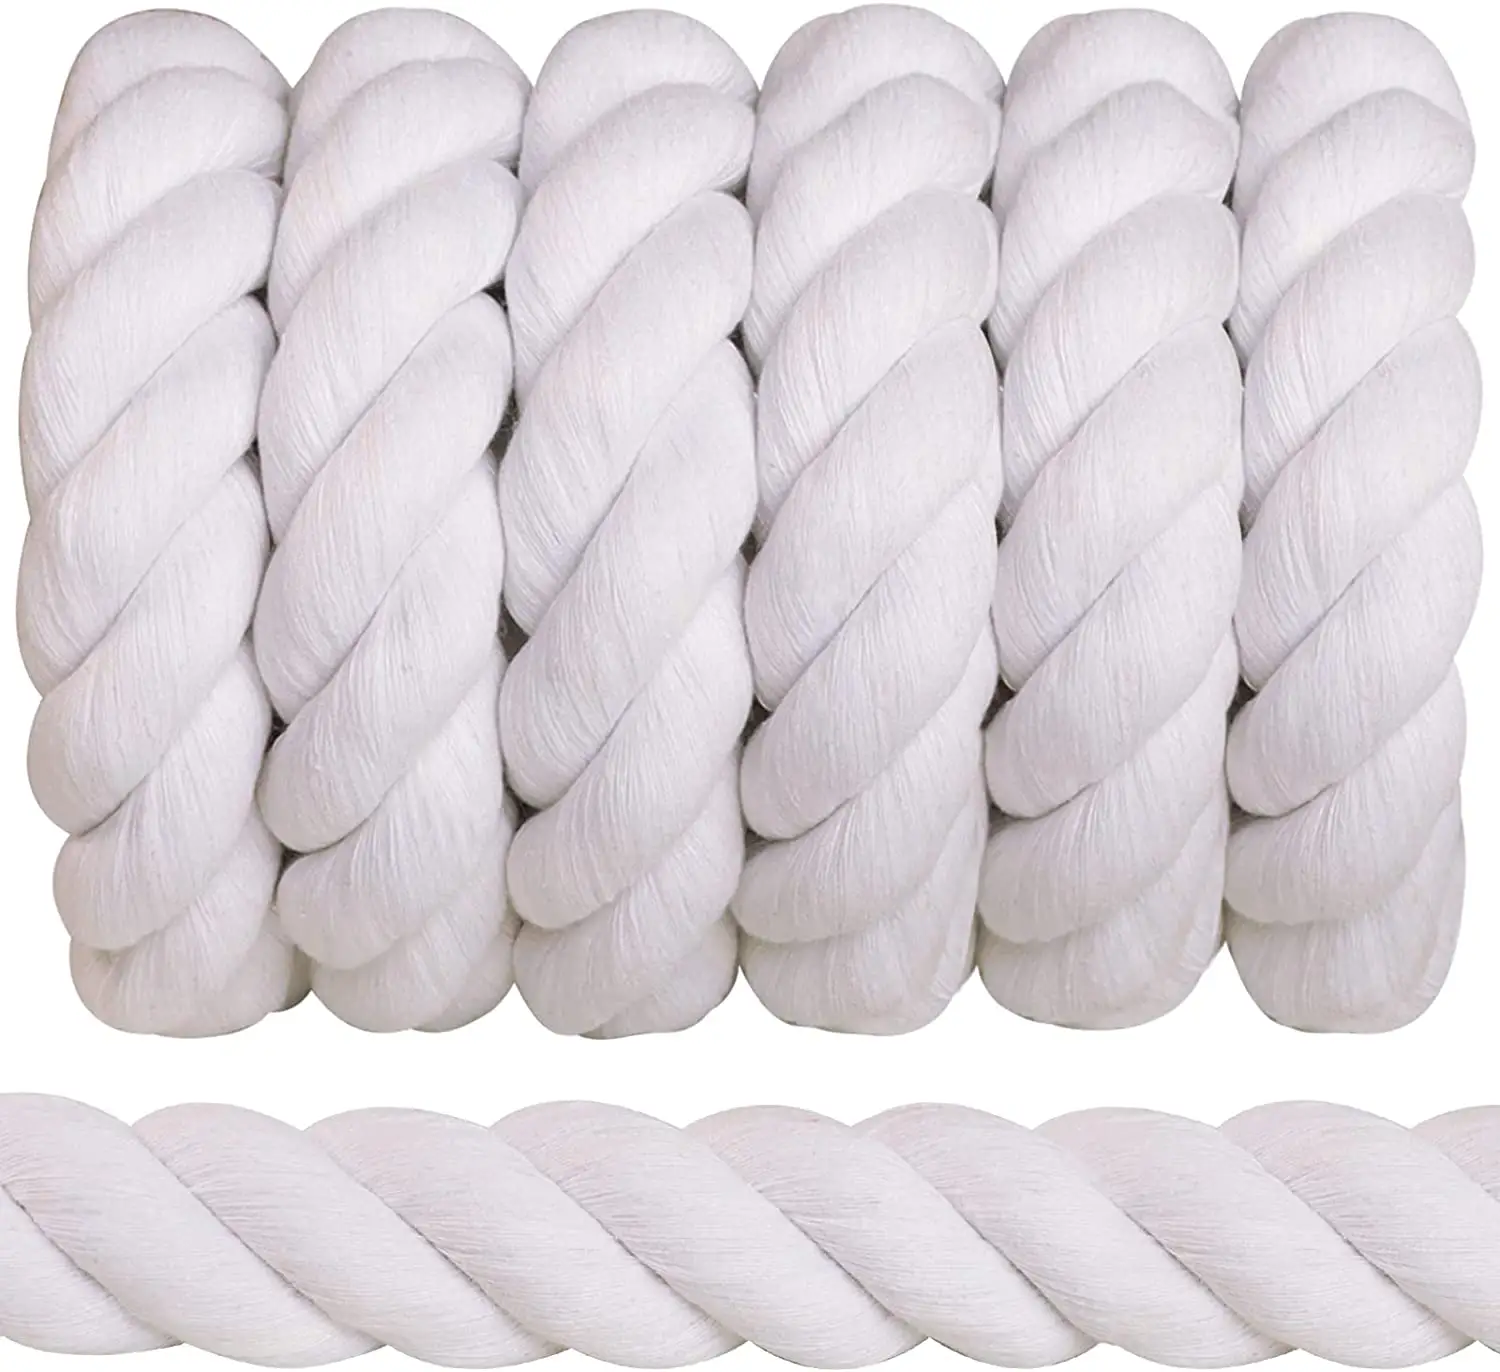 Weißes 30mm gedrehtes Baumwoll seil Natural Thick Strong Rope for Crafts